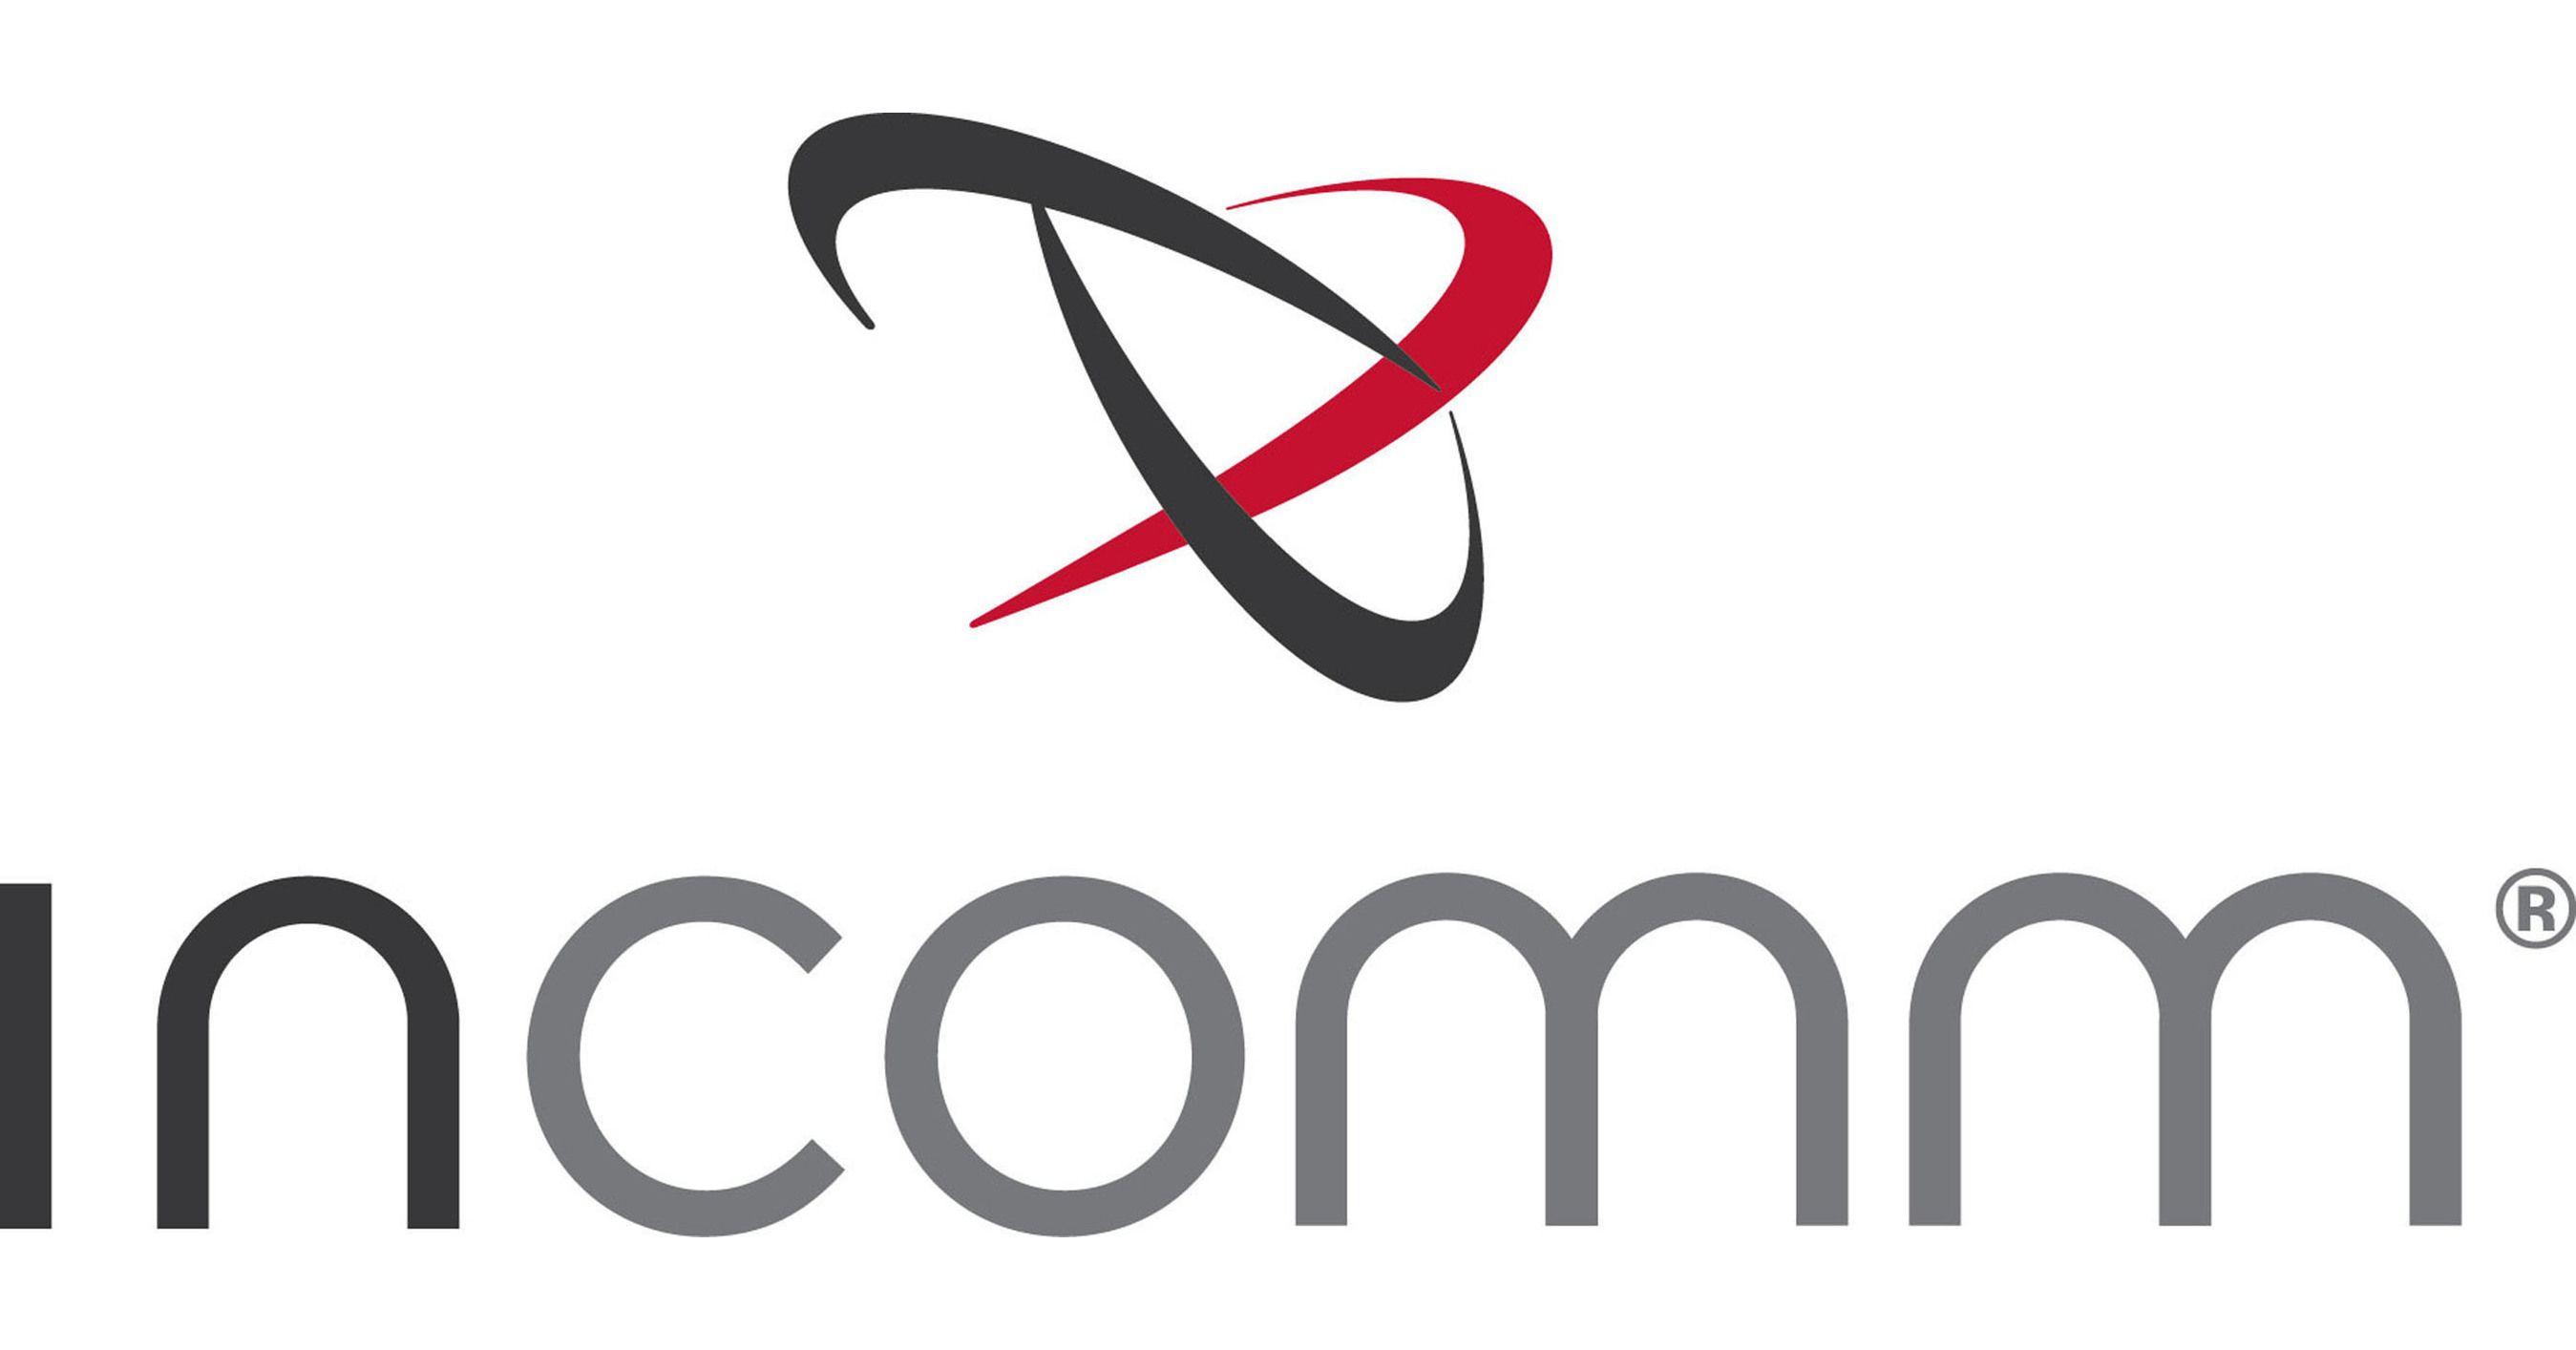 Inncomm Logo - InComm Expands Its Barcode Payment Solutions with New Partnership in ...